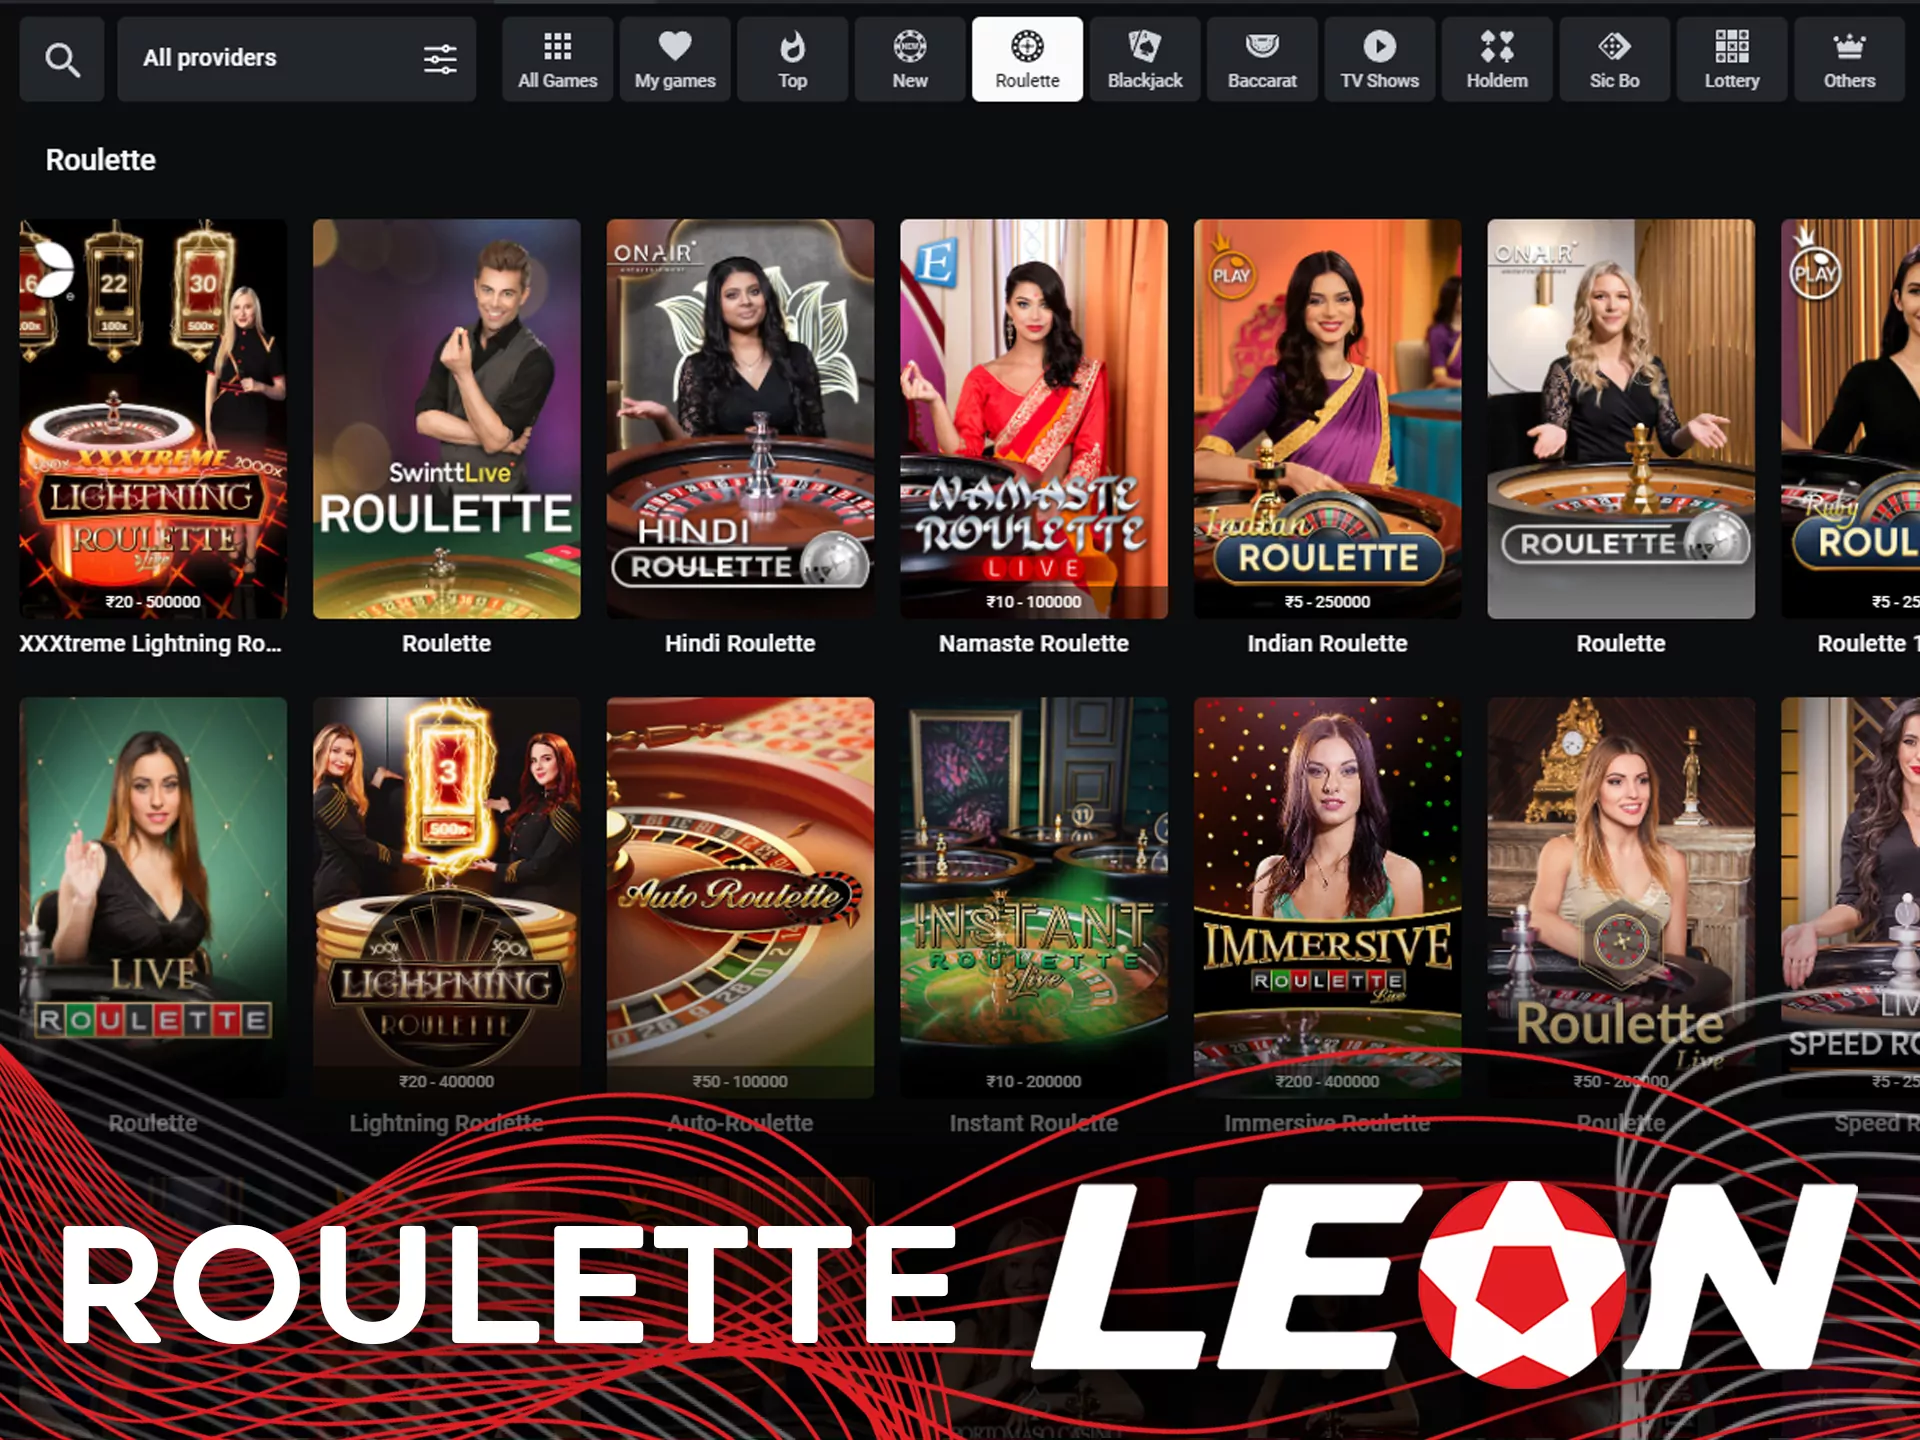 Play roulettes in the Leon Bet casino.